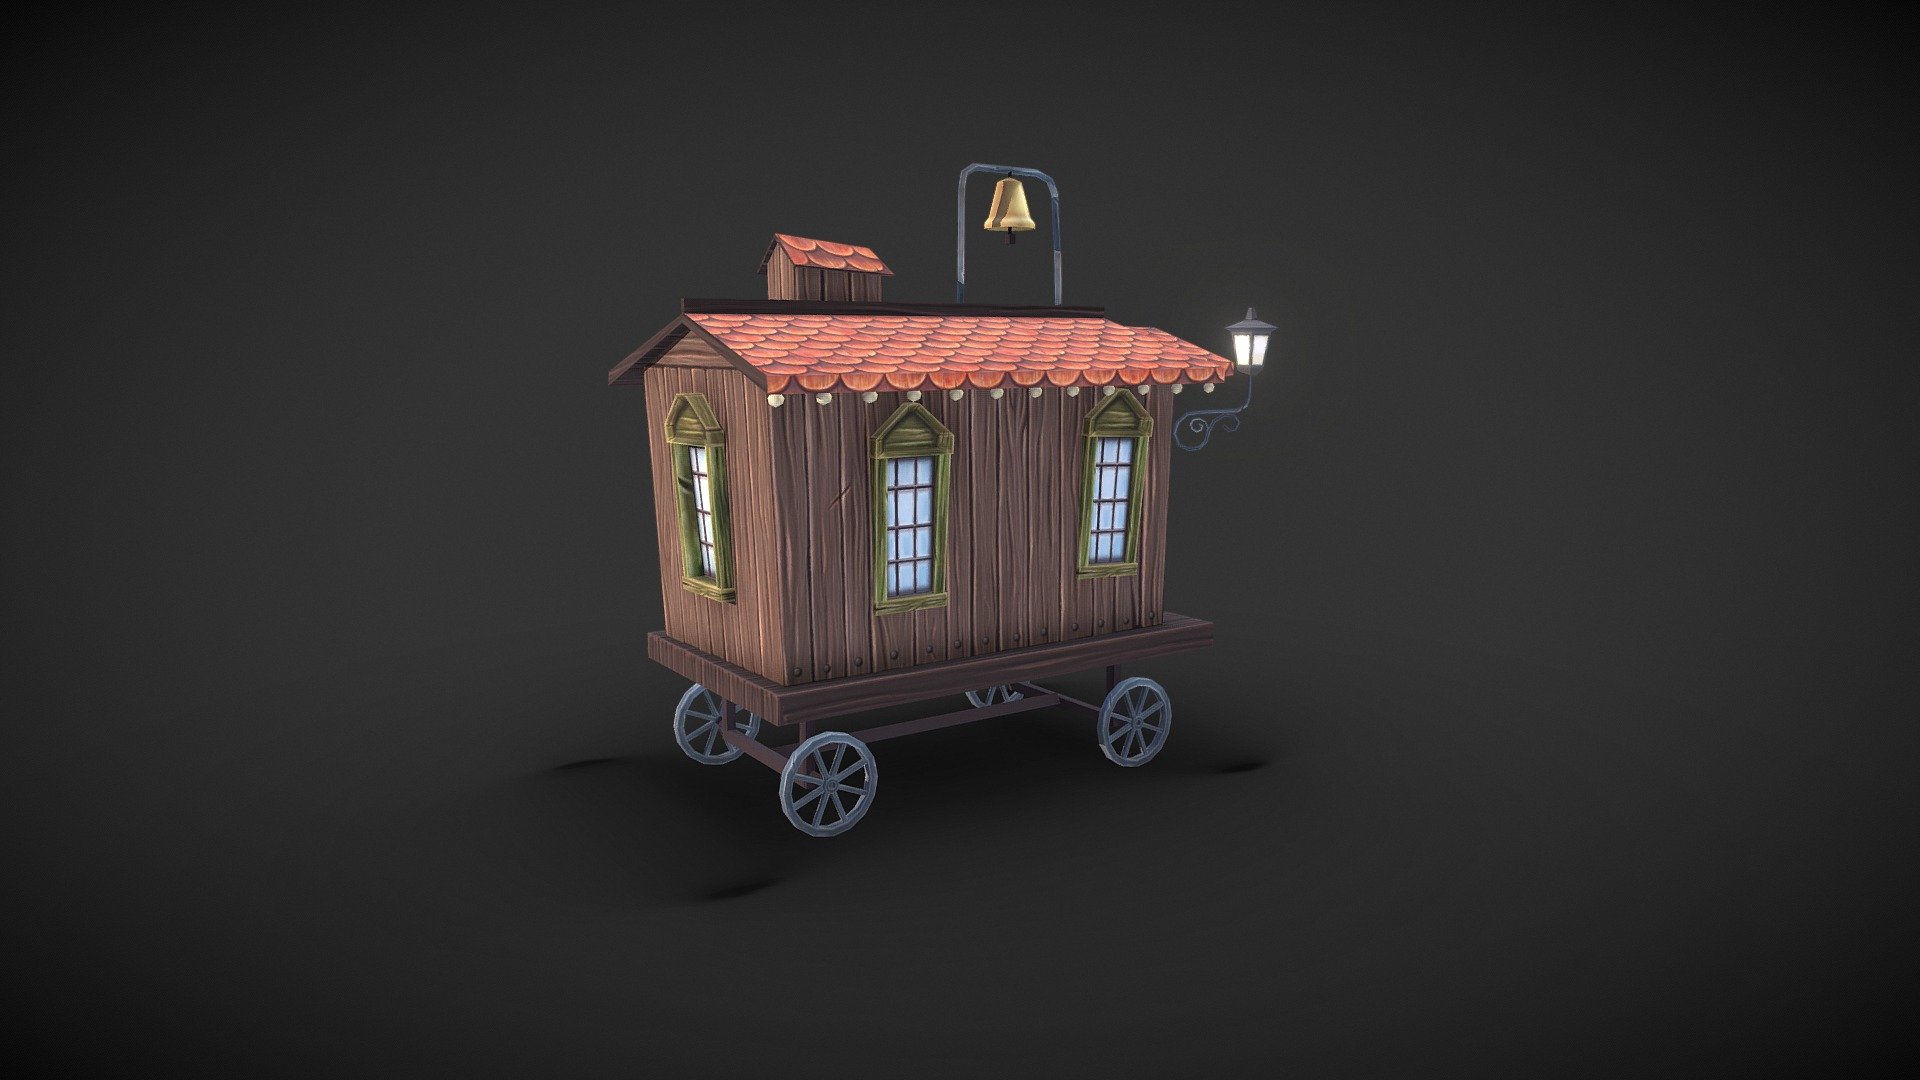 Caravan low-poly 3d model ready for Virtual Reality (VR), Augmented Reality (AR), games and other real-time apps.

Low poly, game ready model with 2k resolution handpaint diffuse texture.

Should you have any questions - don't hesitate to contact me here! - Caravan - 3D model by Mango Team (@polygonby) 3d model